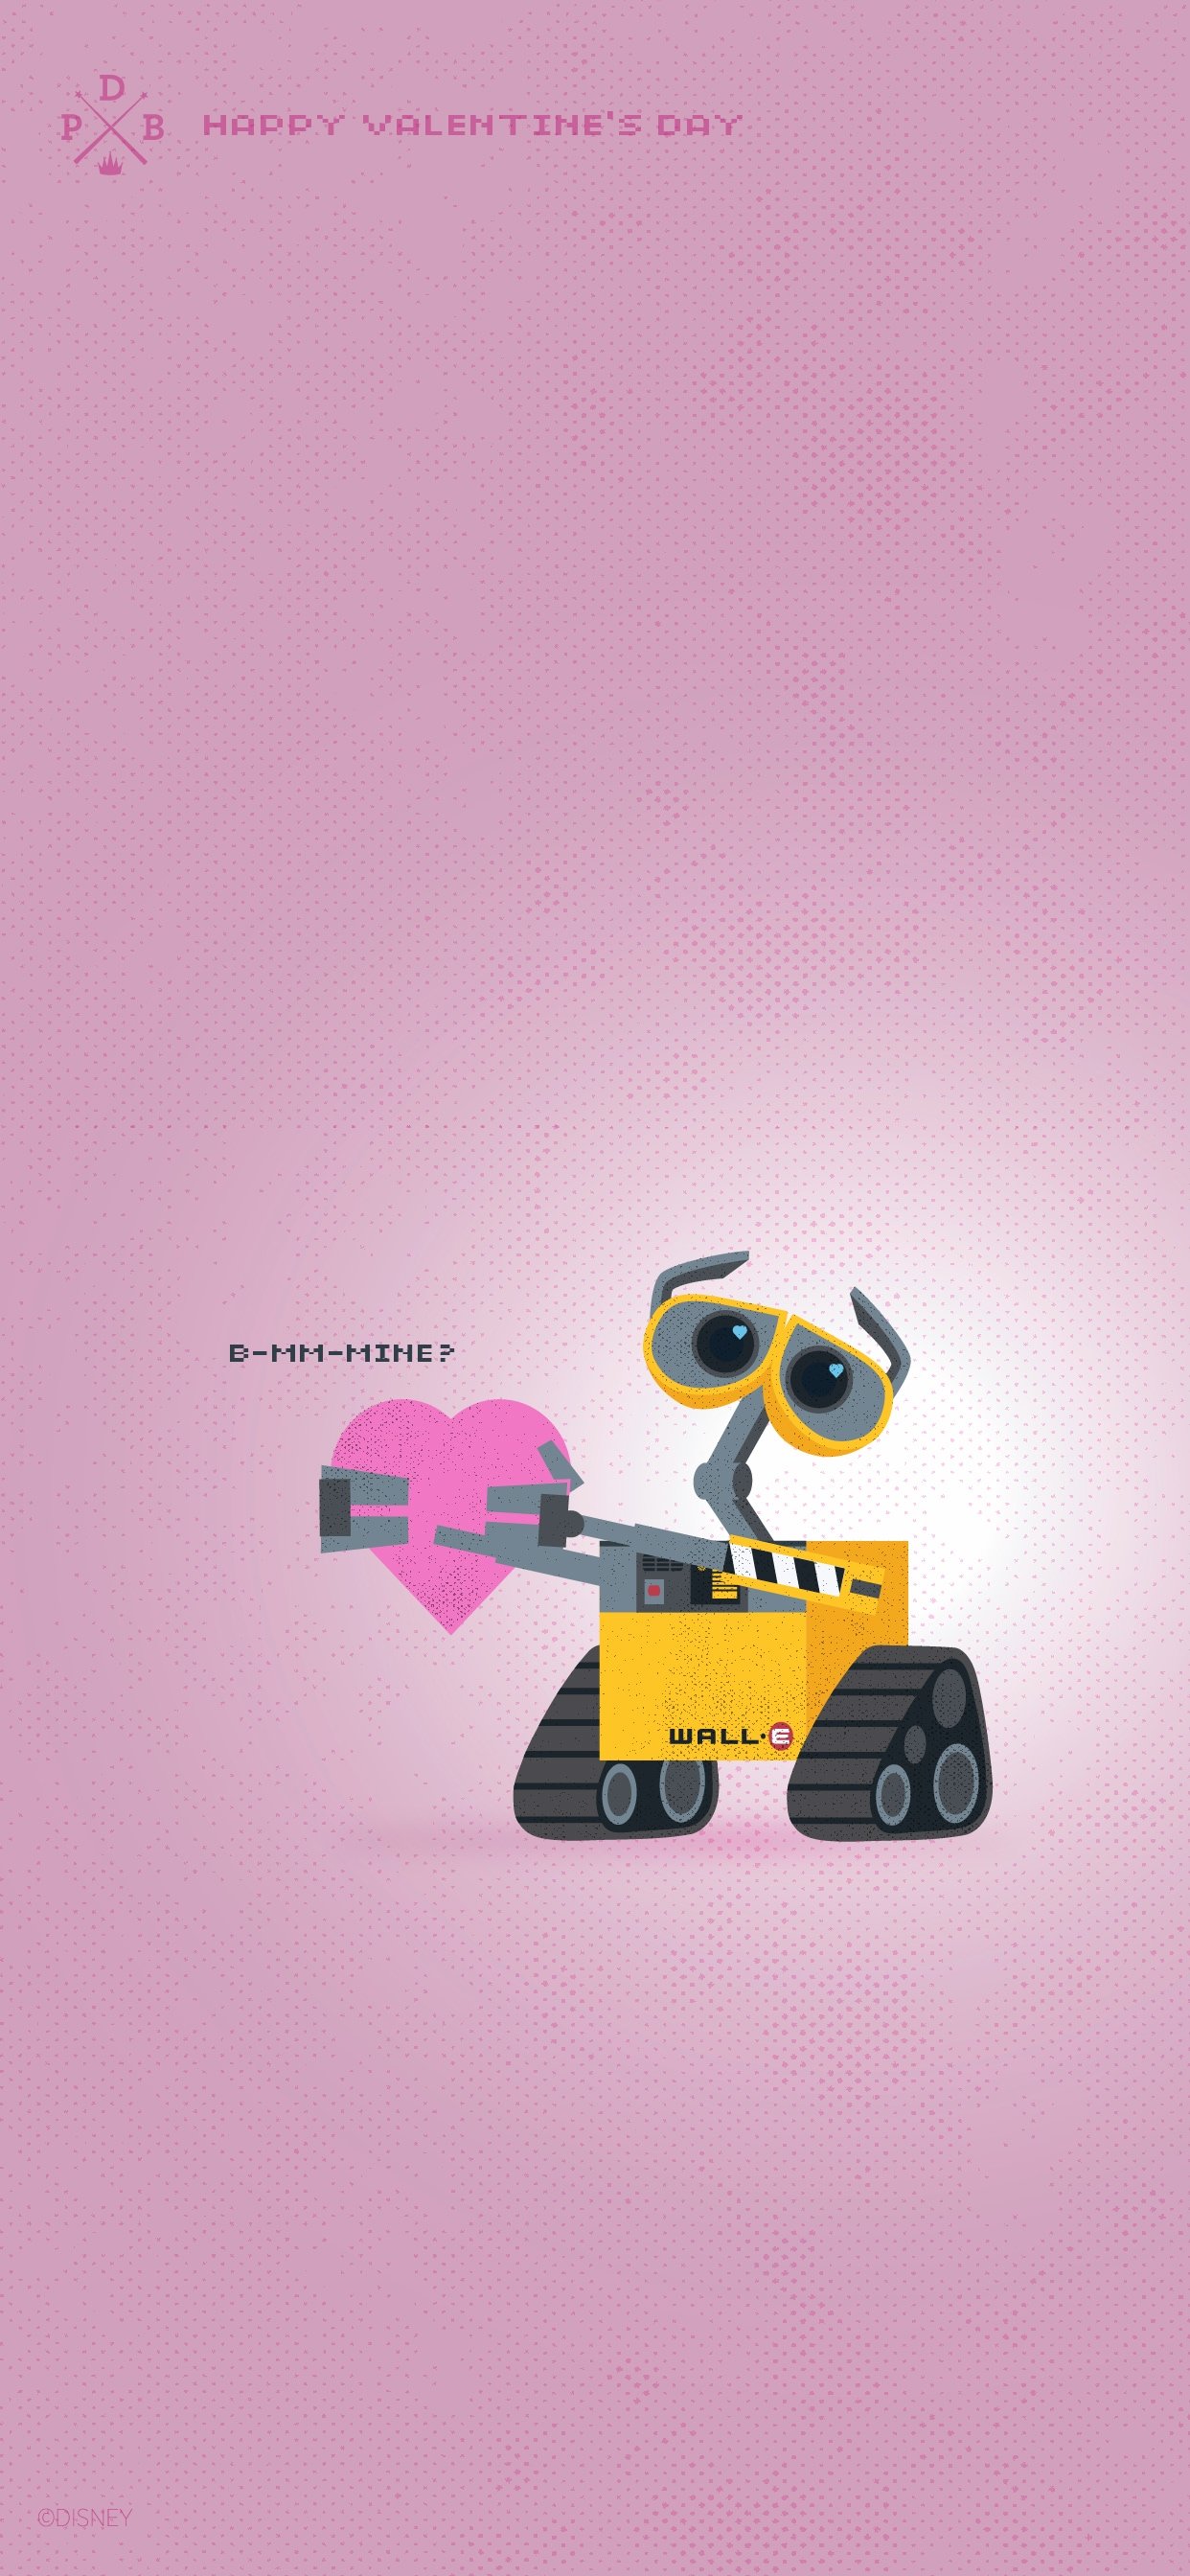 Celebrate Valentine's Day With Wall•E Wallpaper